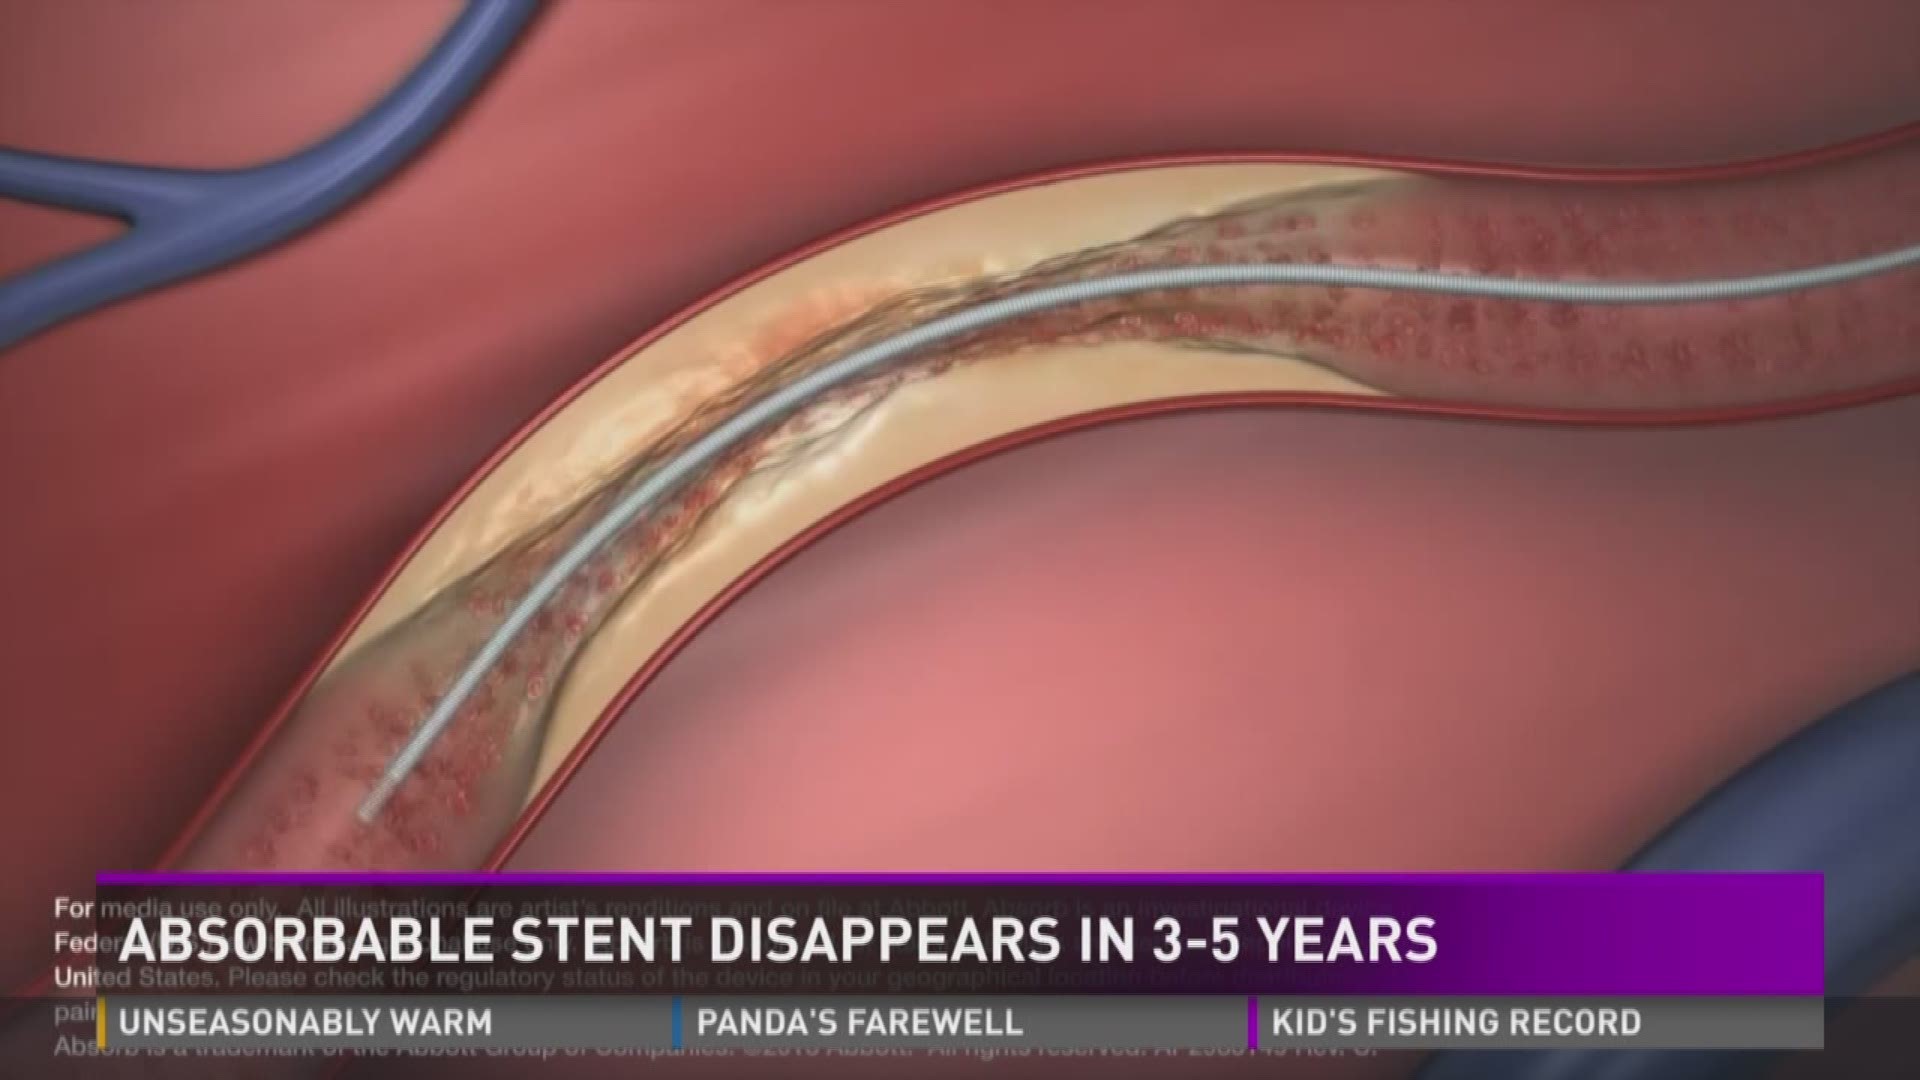 The new stent dissolves over time until it is completely gone after 3-5 years.